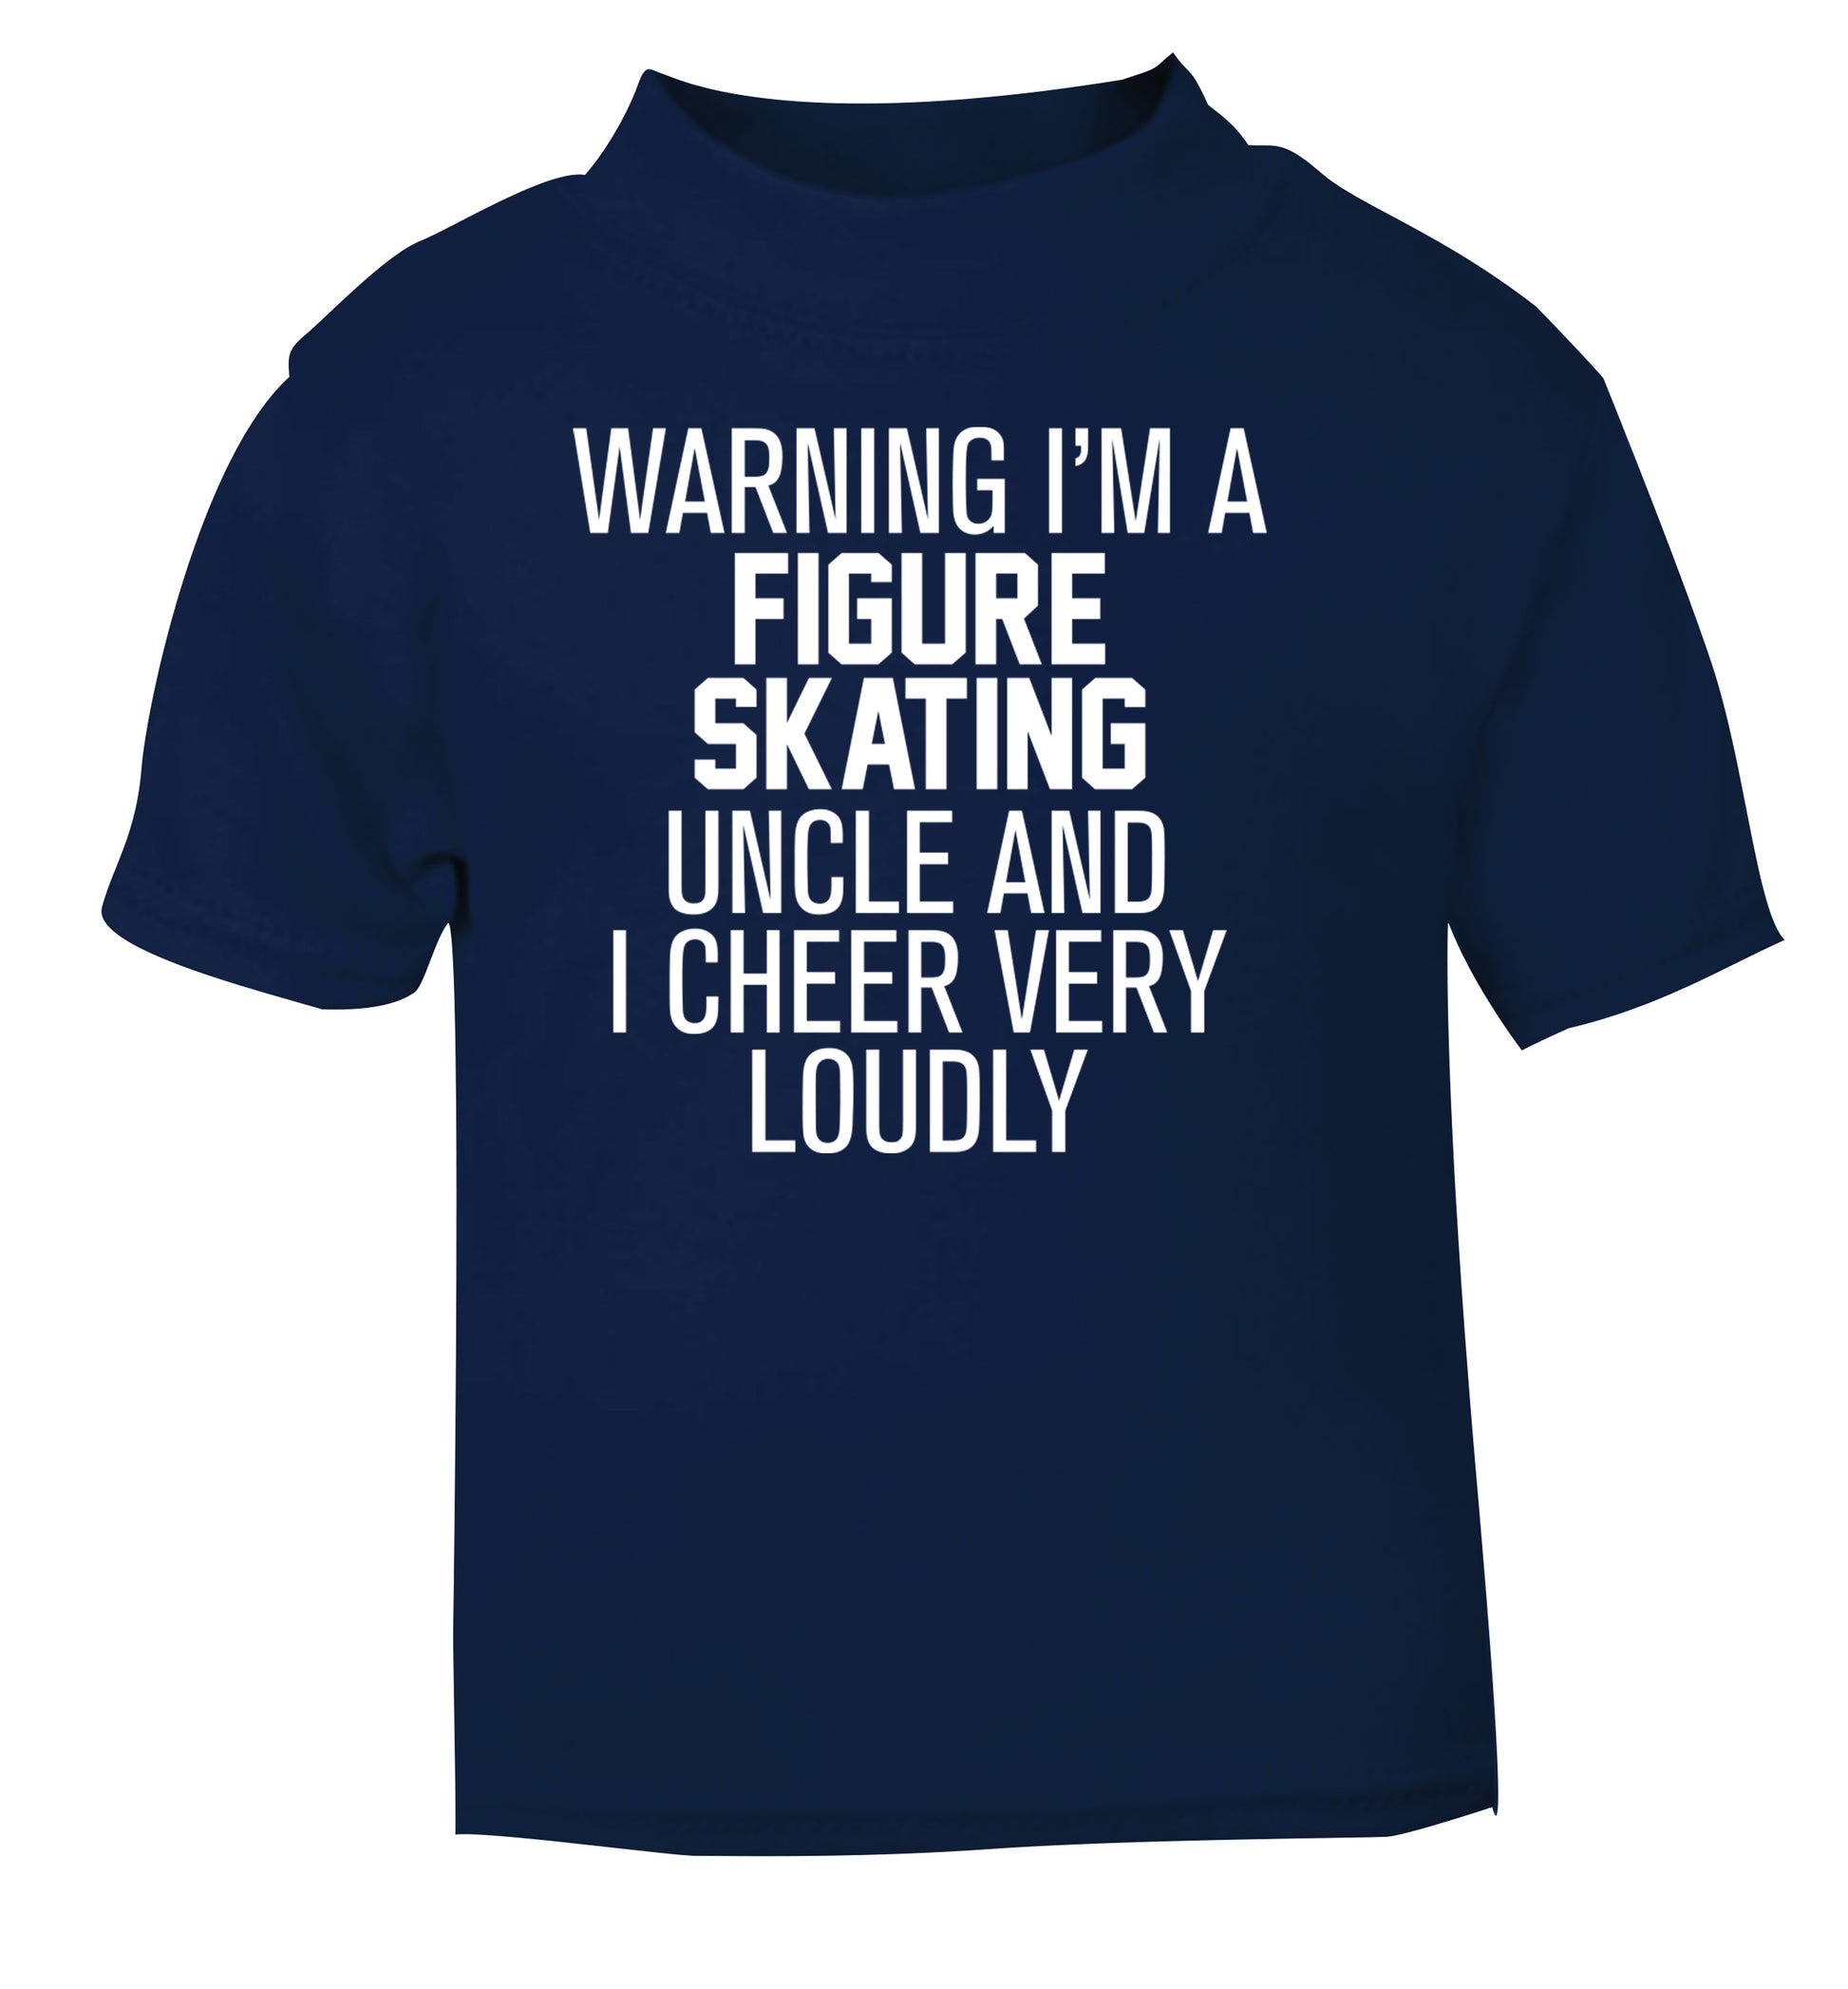 Warning I'm a figure skating uncle and I cheer very loudly navy Baby Toddler Tshirt 2 Years